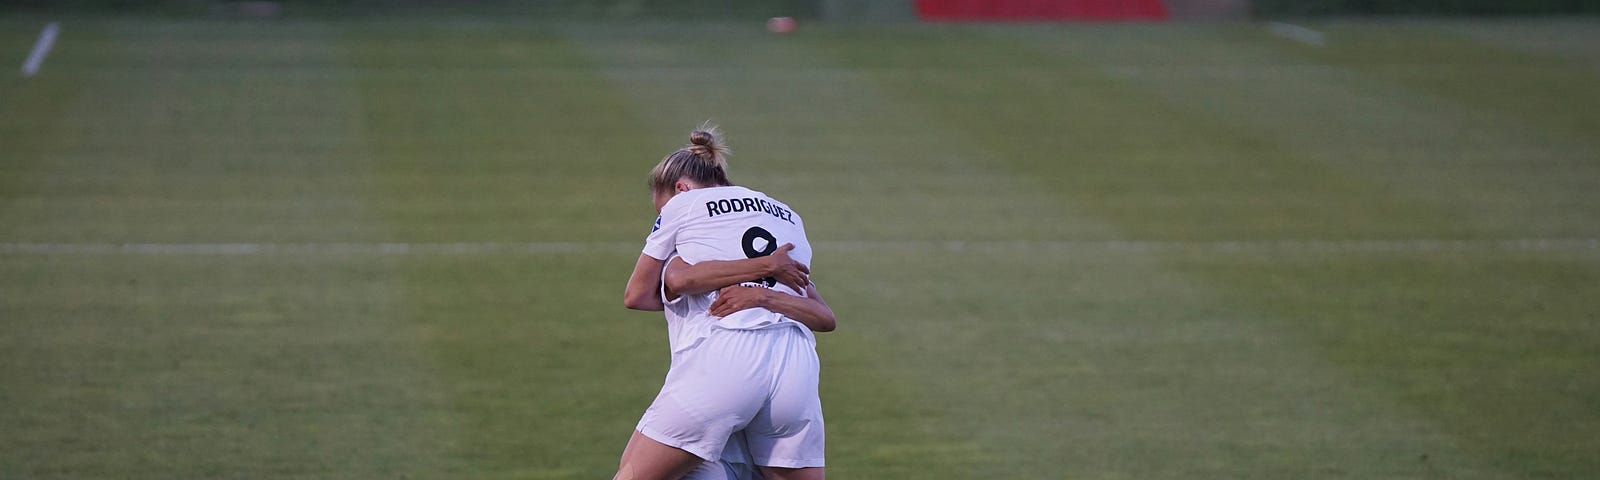 Two soccor players celebrating victory with a dramatic hug.